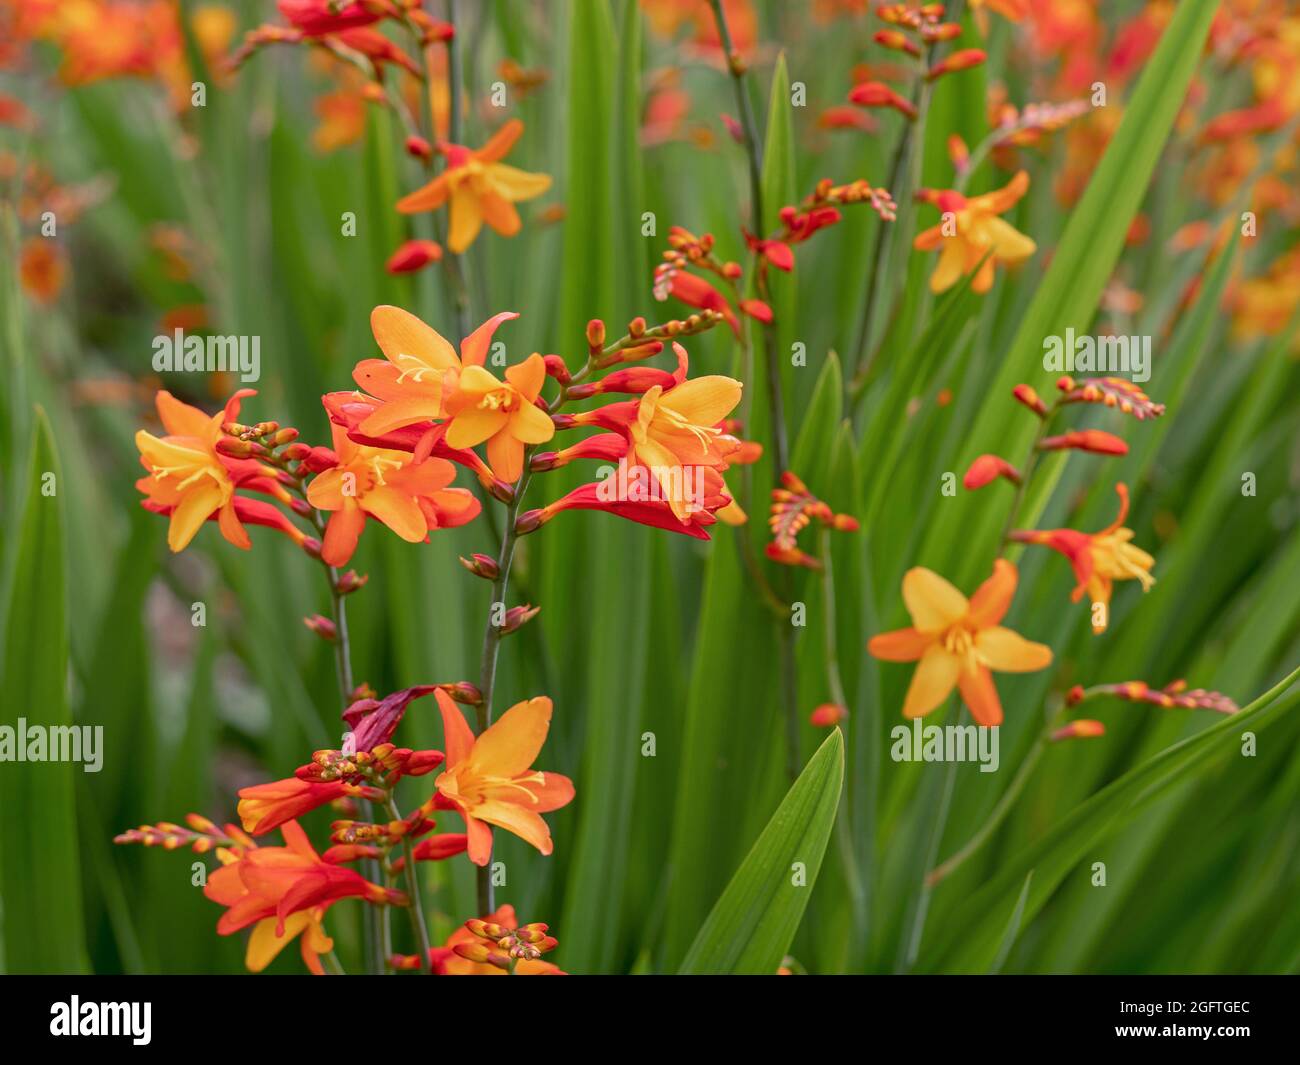 Colourful orange and yellow Crocosmia flowers in a garden Stock Photo